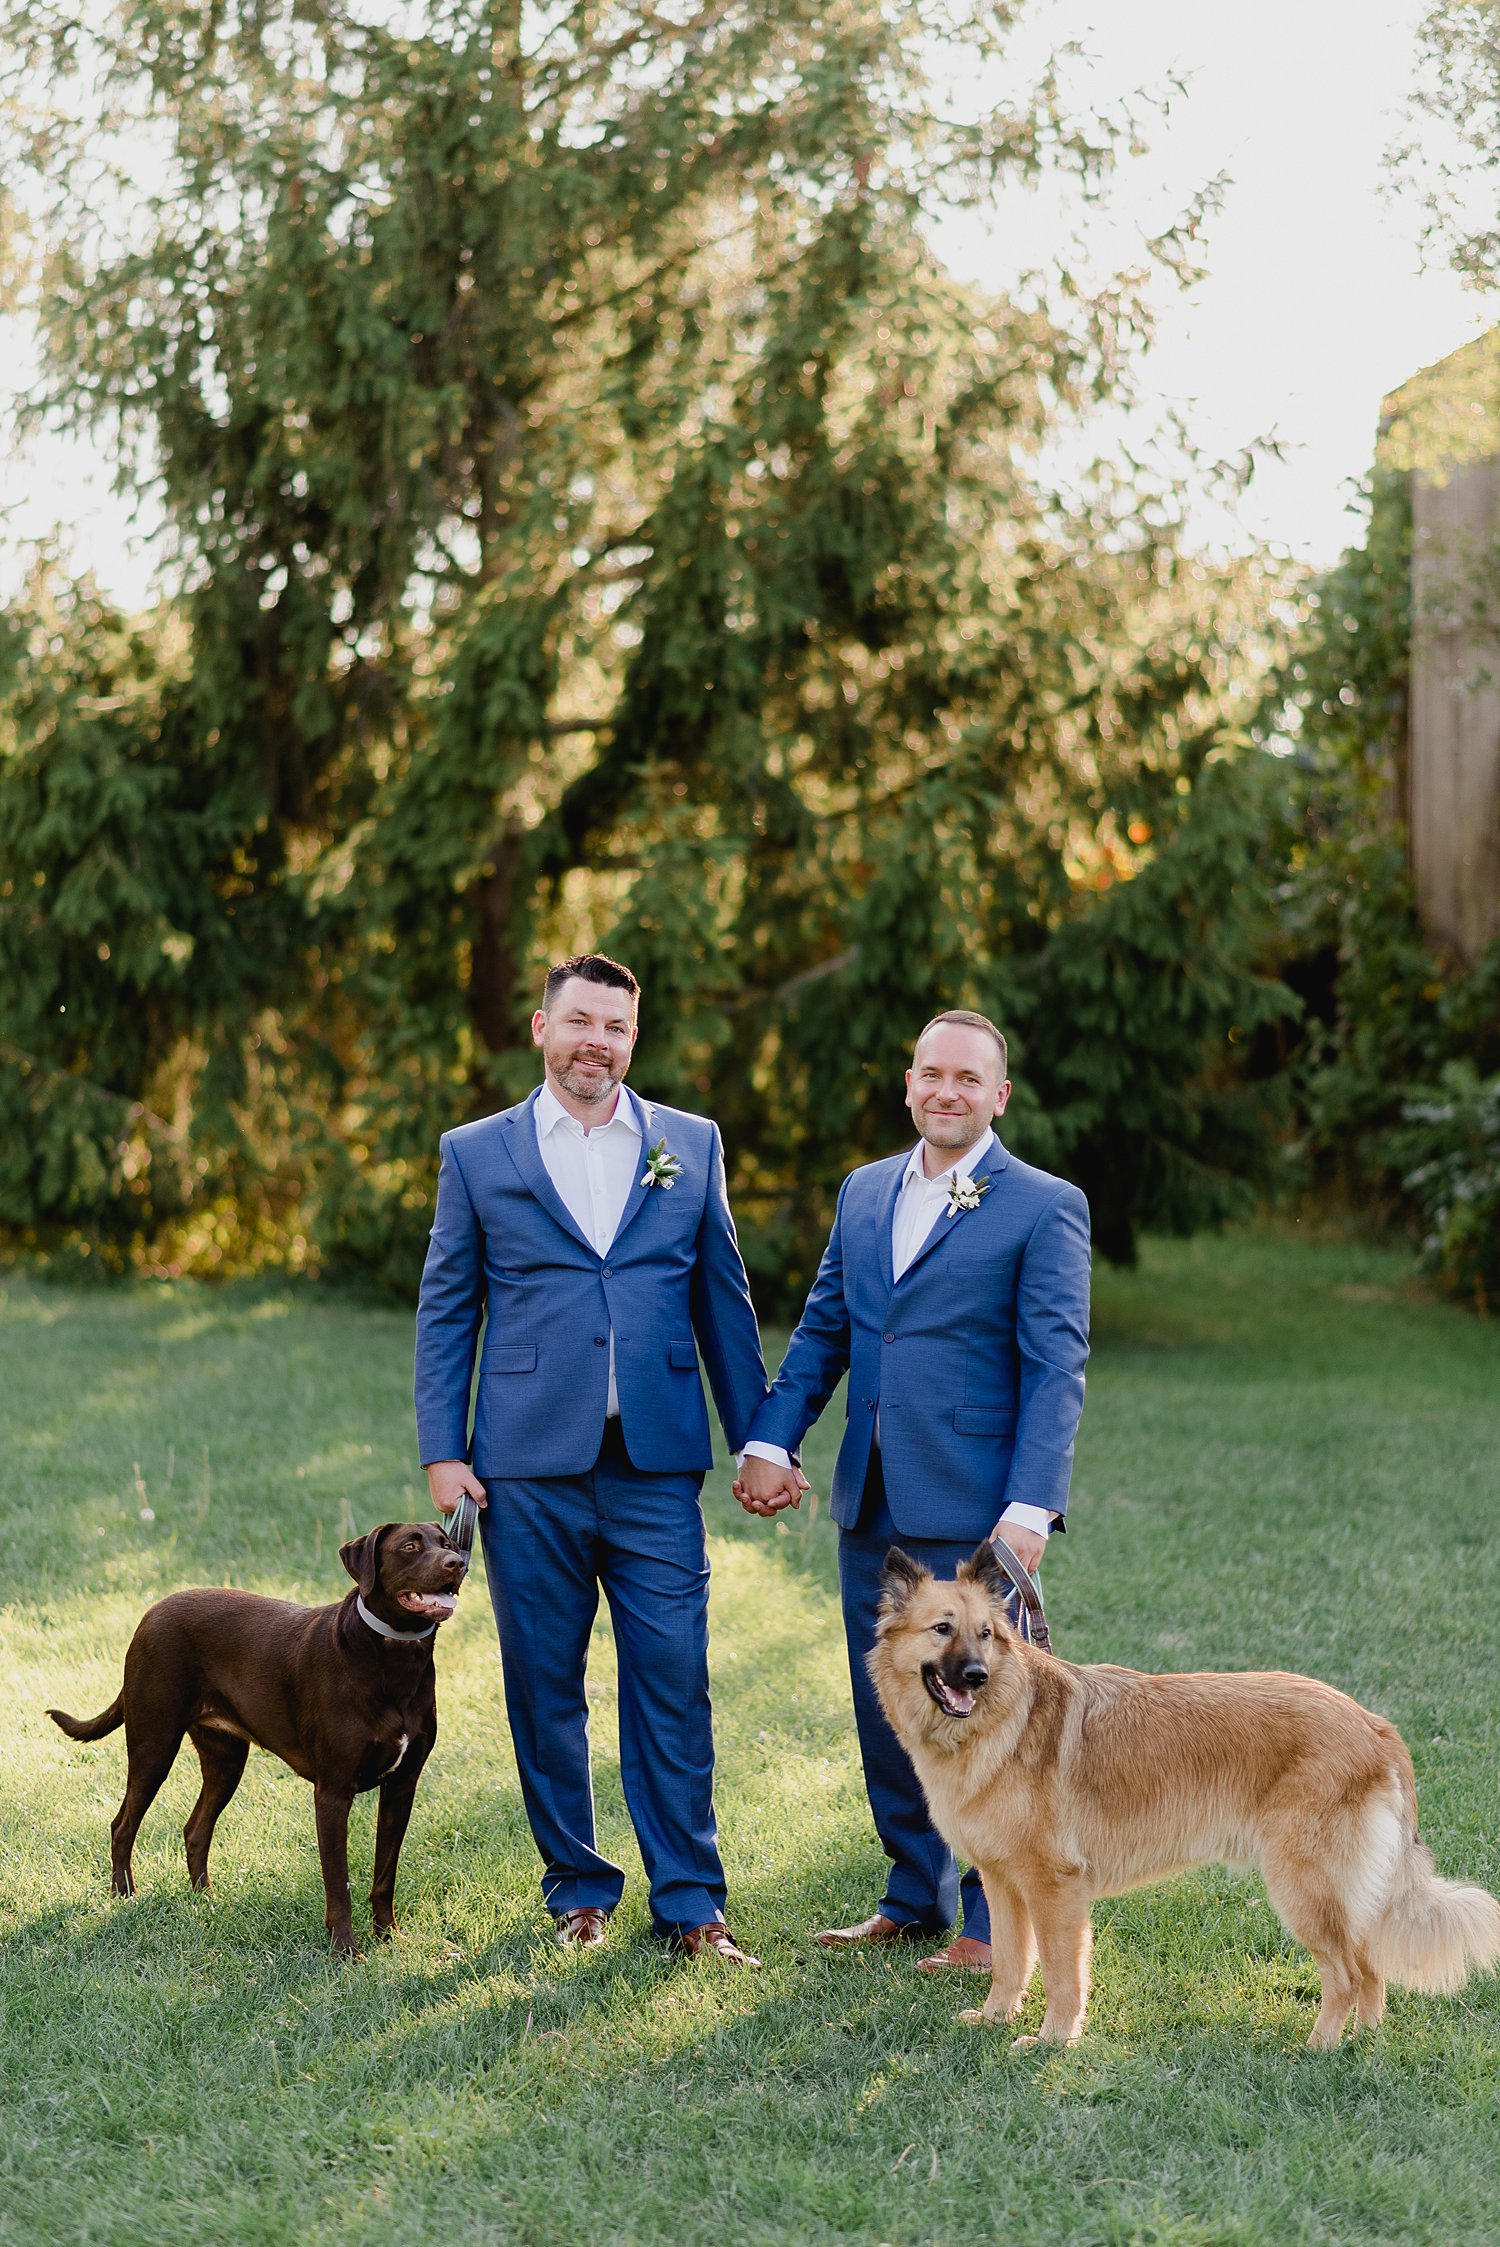 An Intimate Elopement at an Airbnb in Prince Edward County | Prince Edward County Wedding Photographer | Holly McMurter Photographs_0018.jpg